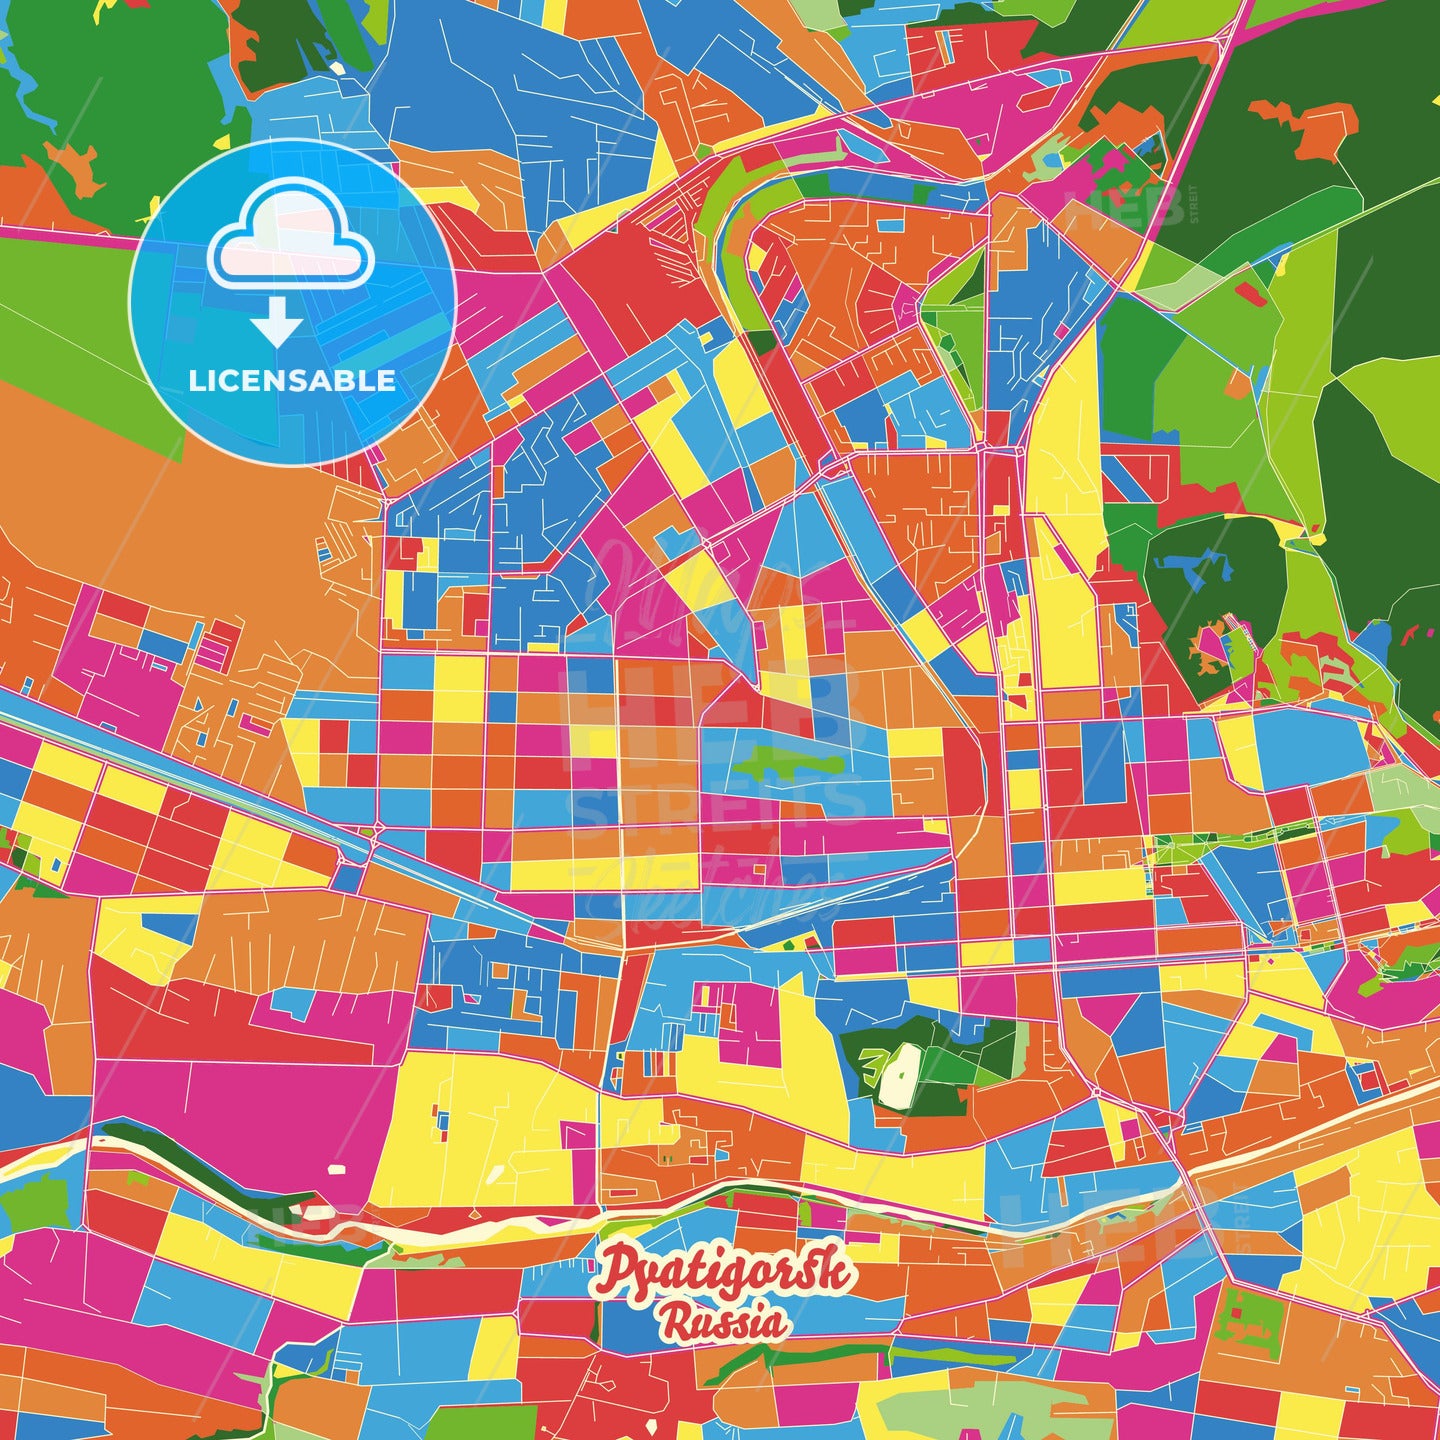 Pyatigorsk, Russia Crazy Colorful Street Map Poster Template - HEBSTREITS Sketches